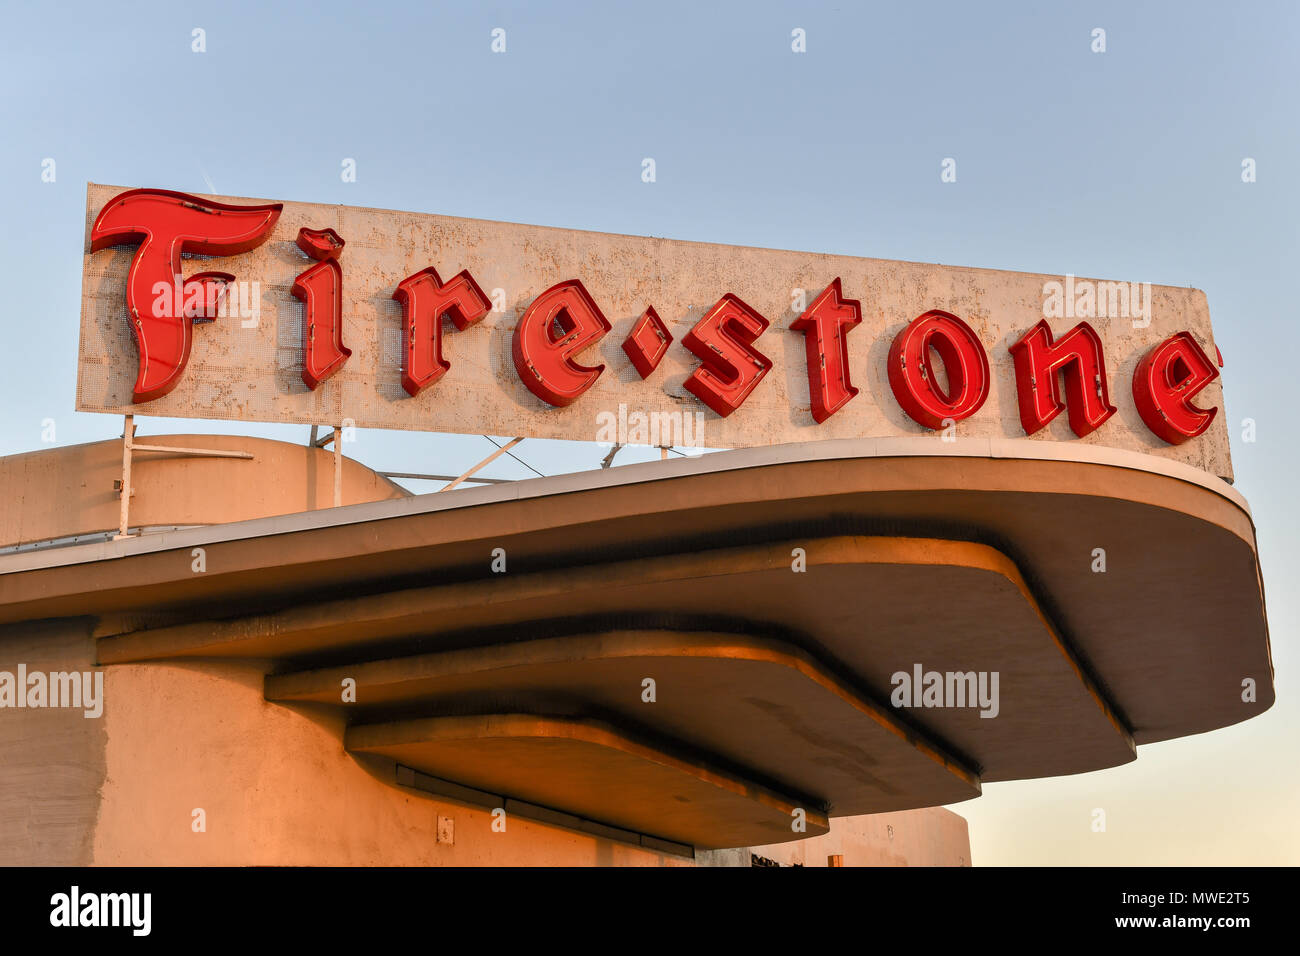 Miami, Florida - April 28, 2018: Vintage Firestone logo on a building. Firestone is an American tire company founded in 1900 and the company was sold  Stock Photo